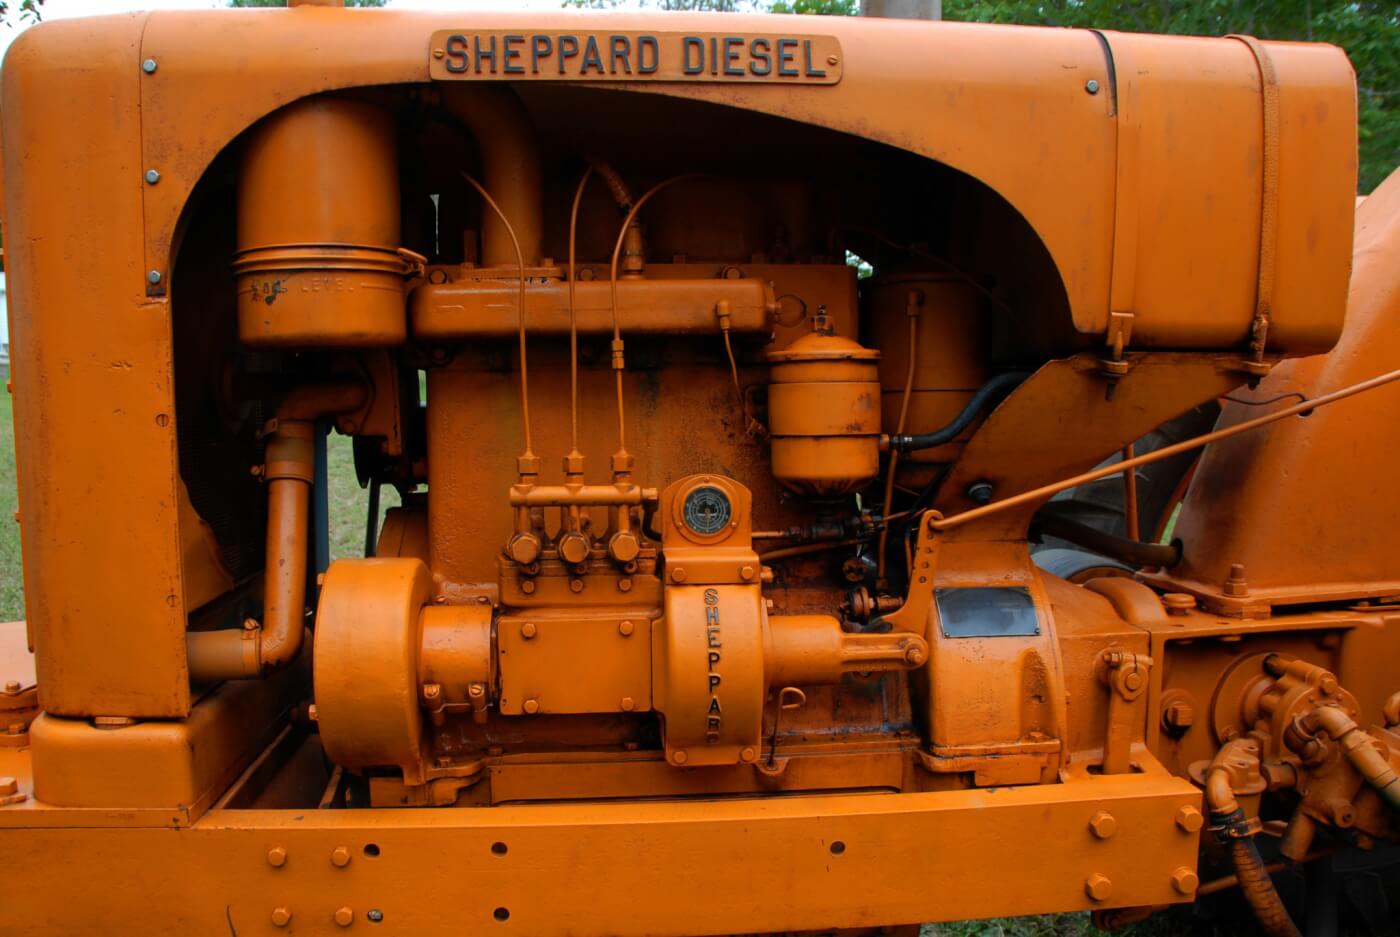 The SD-3's 6B engine was in indirect-injected three-cylinder with four main bearings, wet sleeves and a 22:1 compression ratio. It was direct start and had a cold start aid in the form of an electric coil onto which was sprayed diesel fuel. The system didn't work very well and was most often disabled because it tended to allow air into the injection system. At 1,660 lbs, the engine is massive for its small 188 ci displacement. The 6E engine was optional and had a quarter-inch more bore. Version of these engines were offered for industrial use, marine applications or generators.